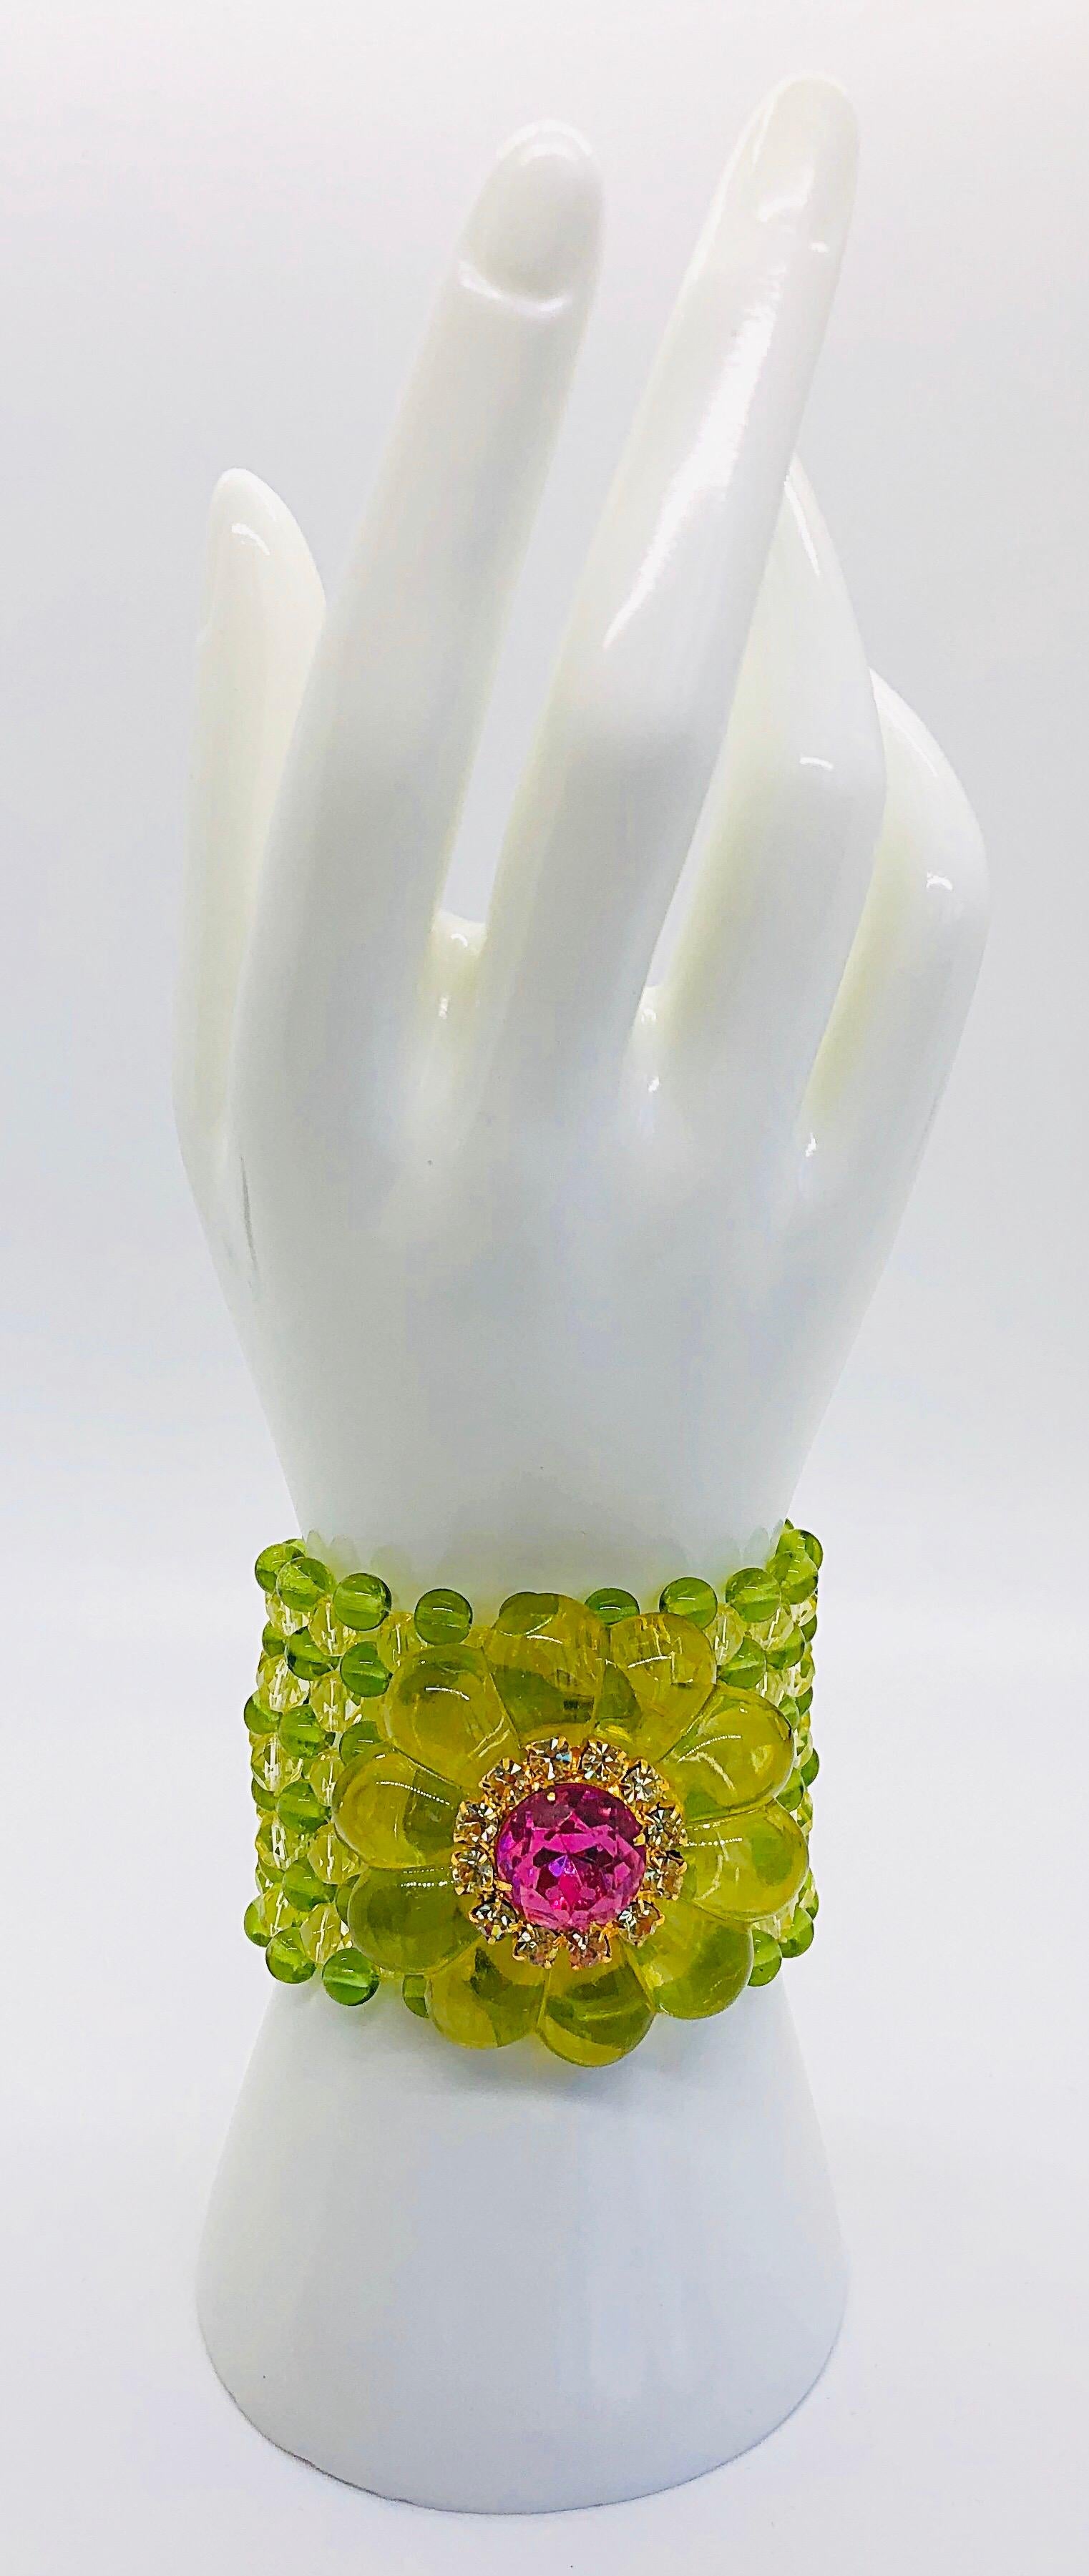 Chic 1960s mod neon lime green and hot pink large lucite beaded rhinestone bracelet cuff! Features intricate carved gold hardware closure. The perfect bold statement piece that can really add some pop to any outfit. Can easily be dressed up or down.